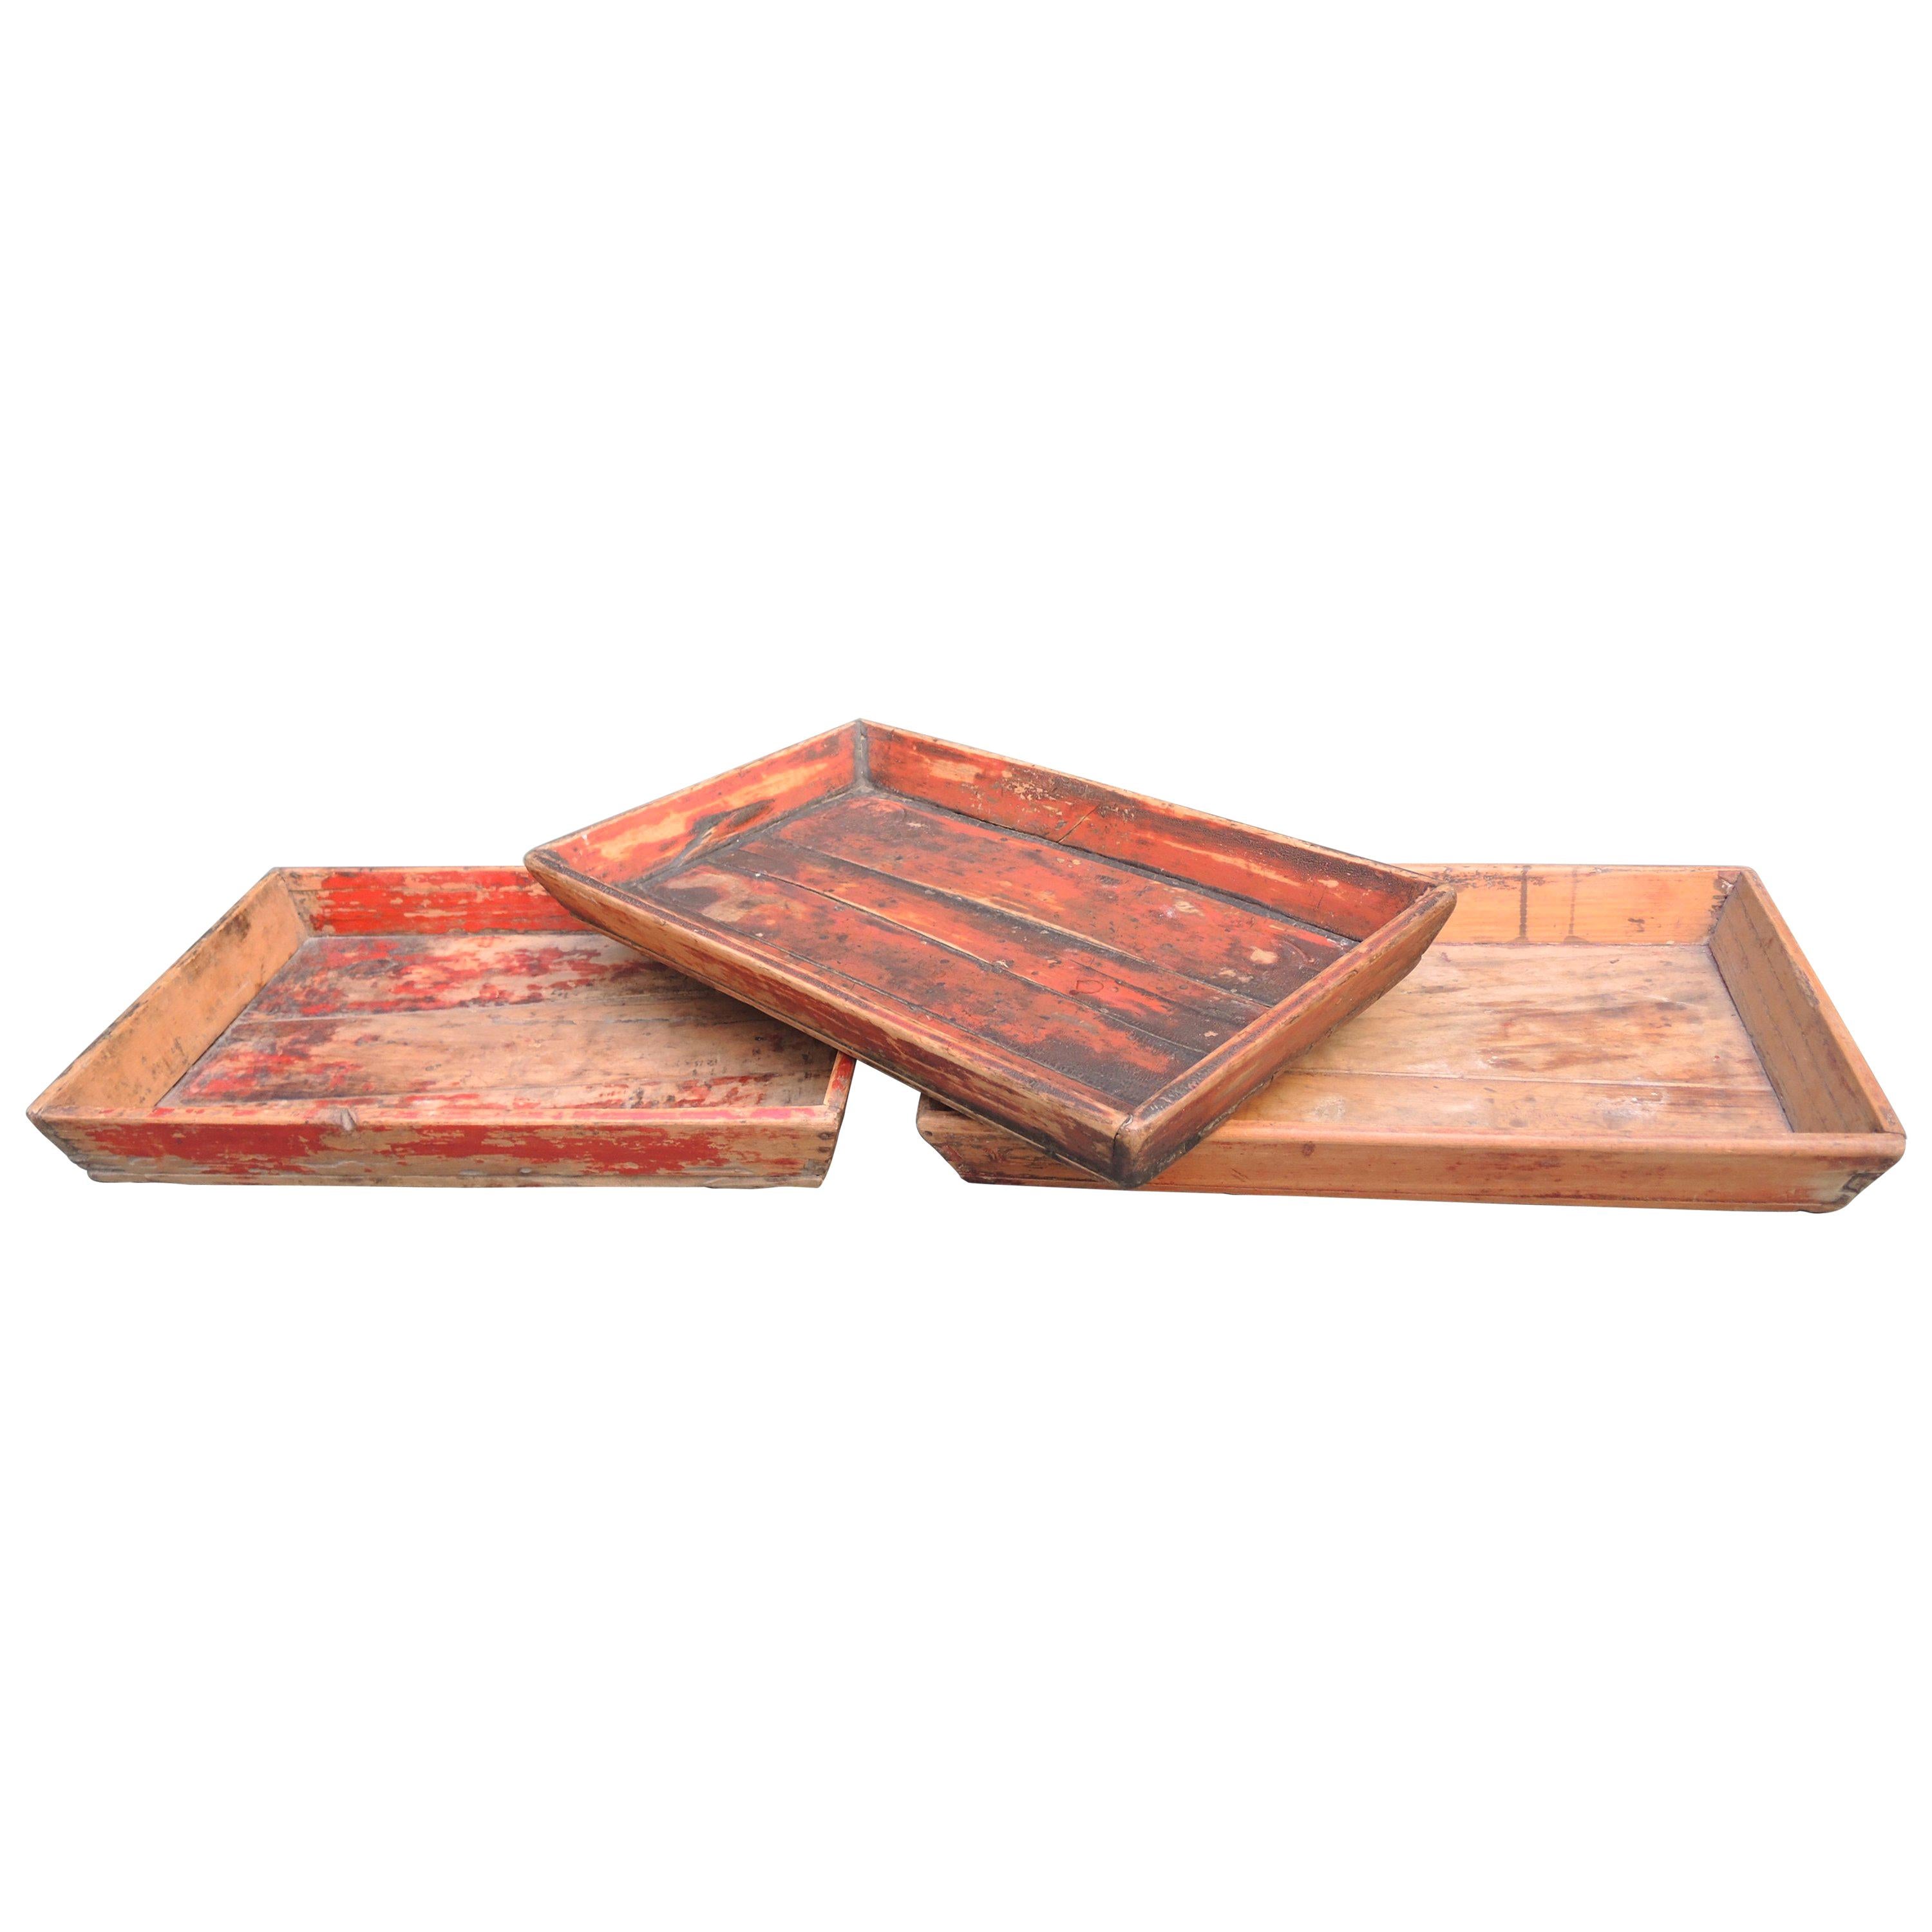  Antique Chinese Provincial Wood Trays with Worn Red Paint